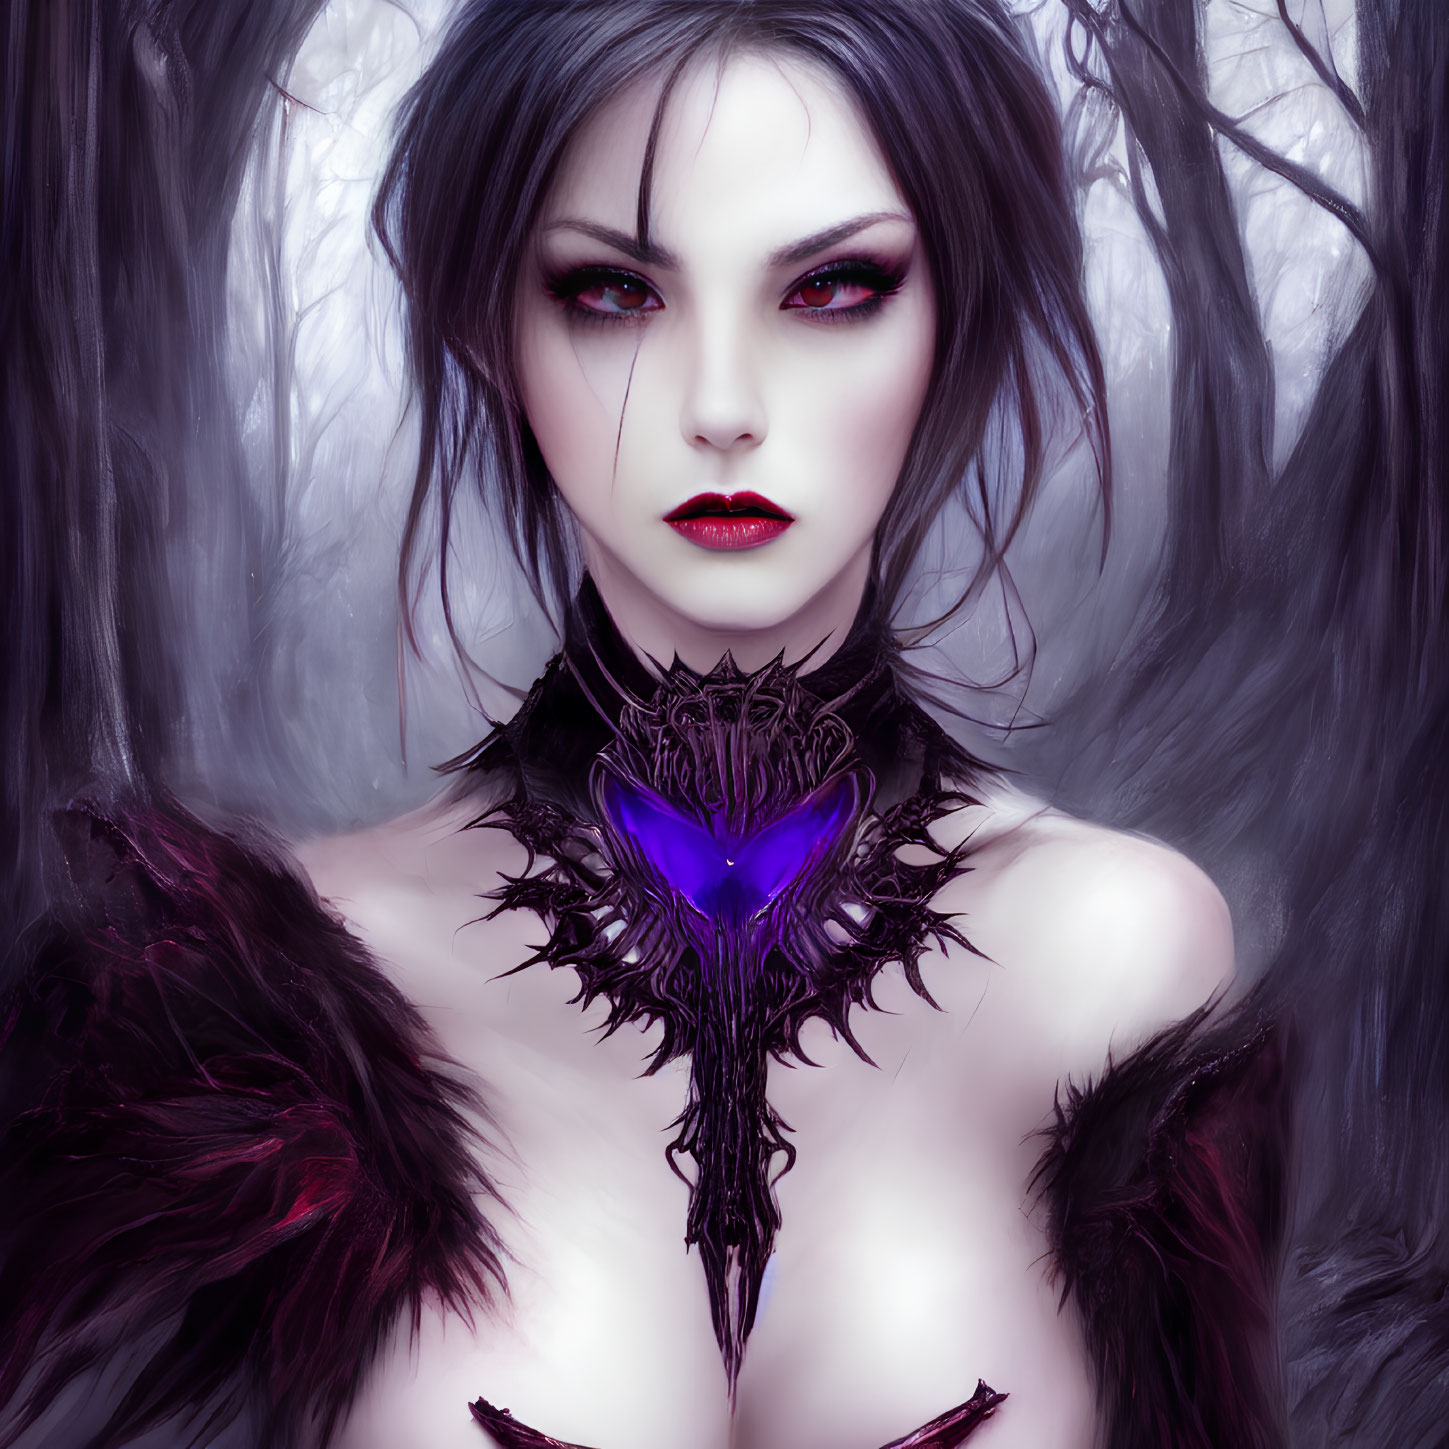 Illustration of pale-skinned female with dark makeup and red eyes in black feathered attire with glowing